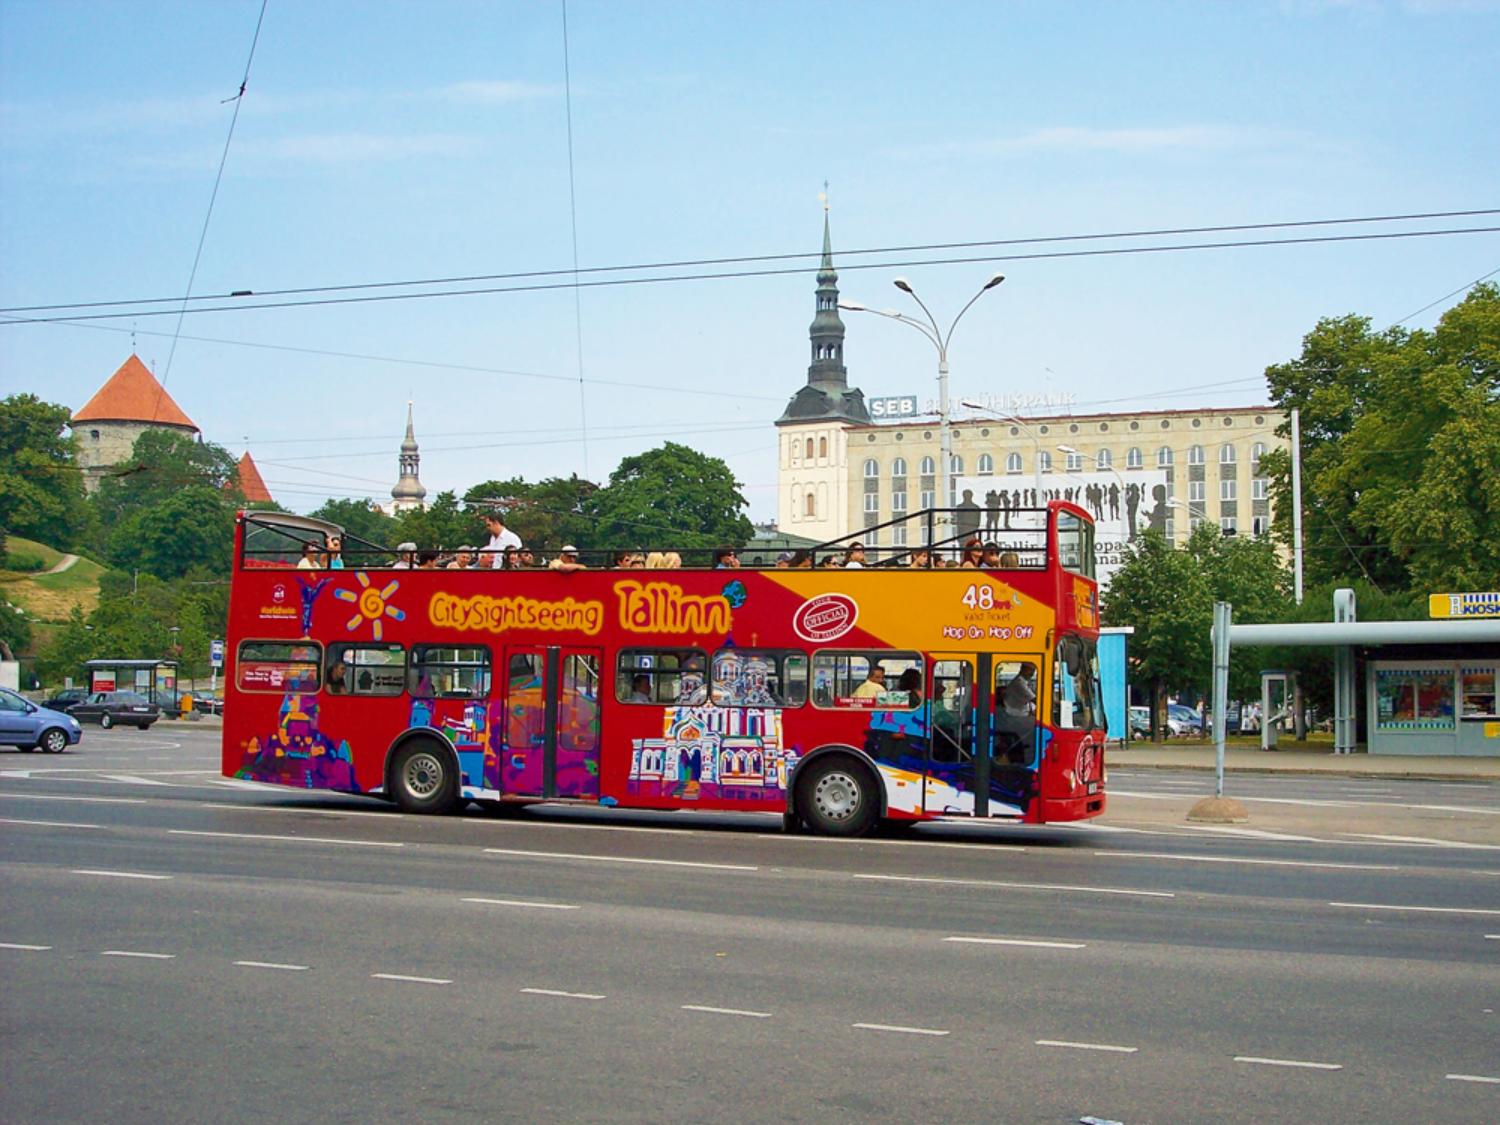 Visit Tallinn on an open-top bus: scenic tour with multiple stops